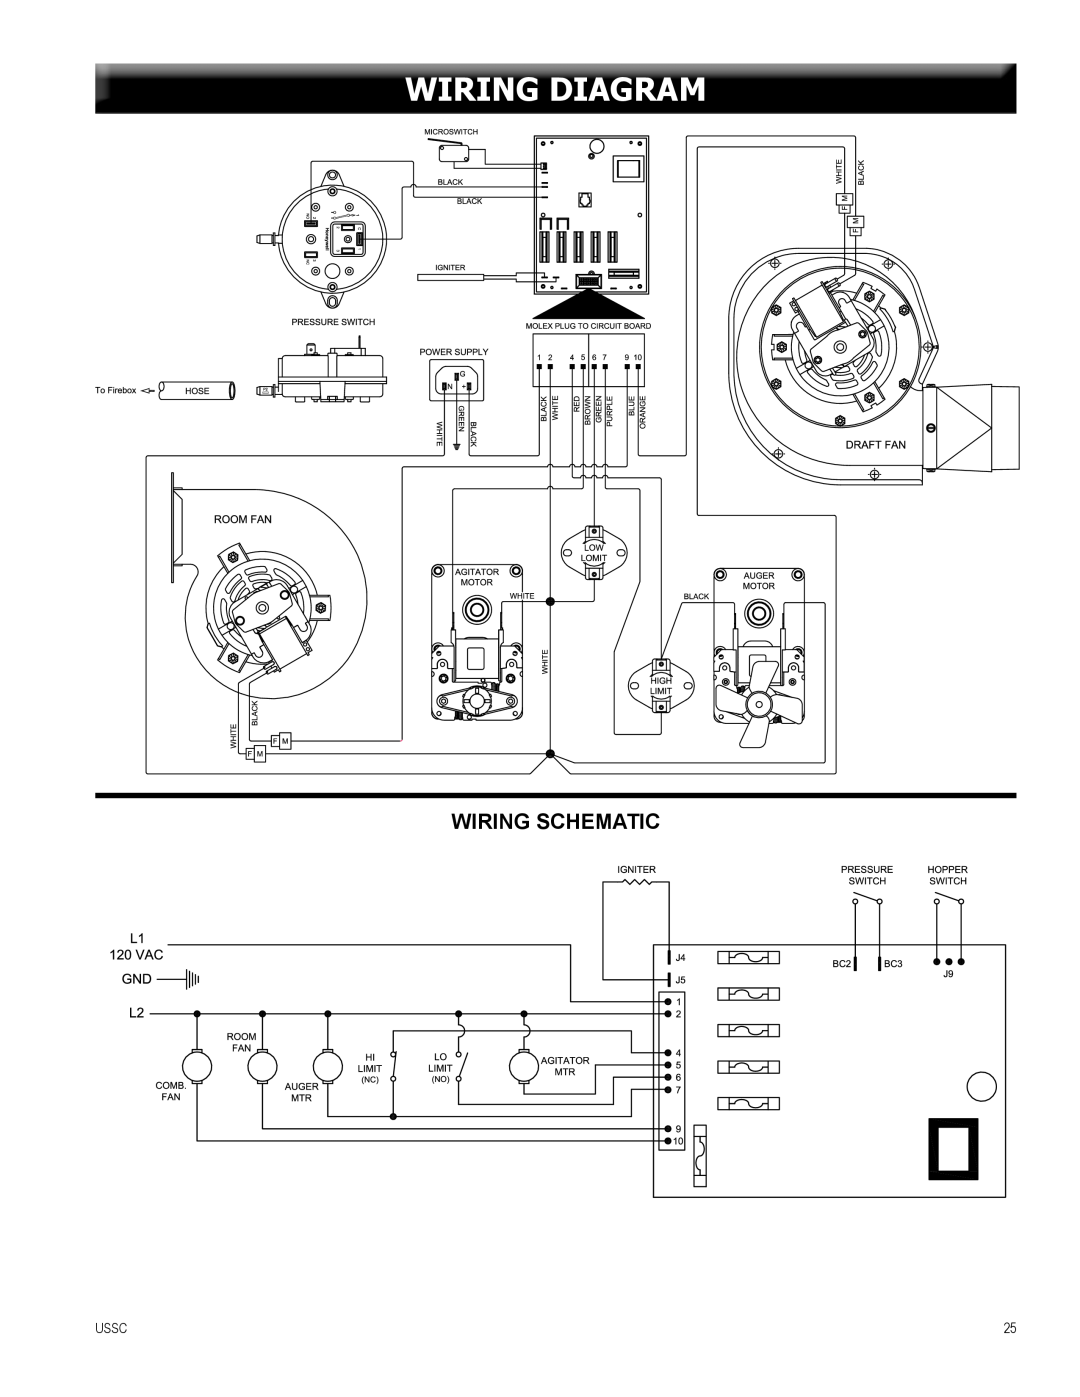 United States Stove 6041I, 6041TP, 6041HF warranty Wiring Diagram, Wiring Schematic 